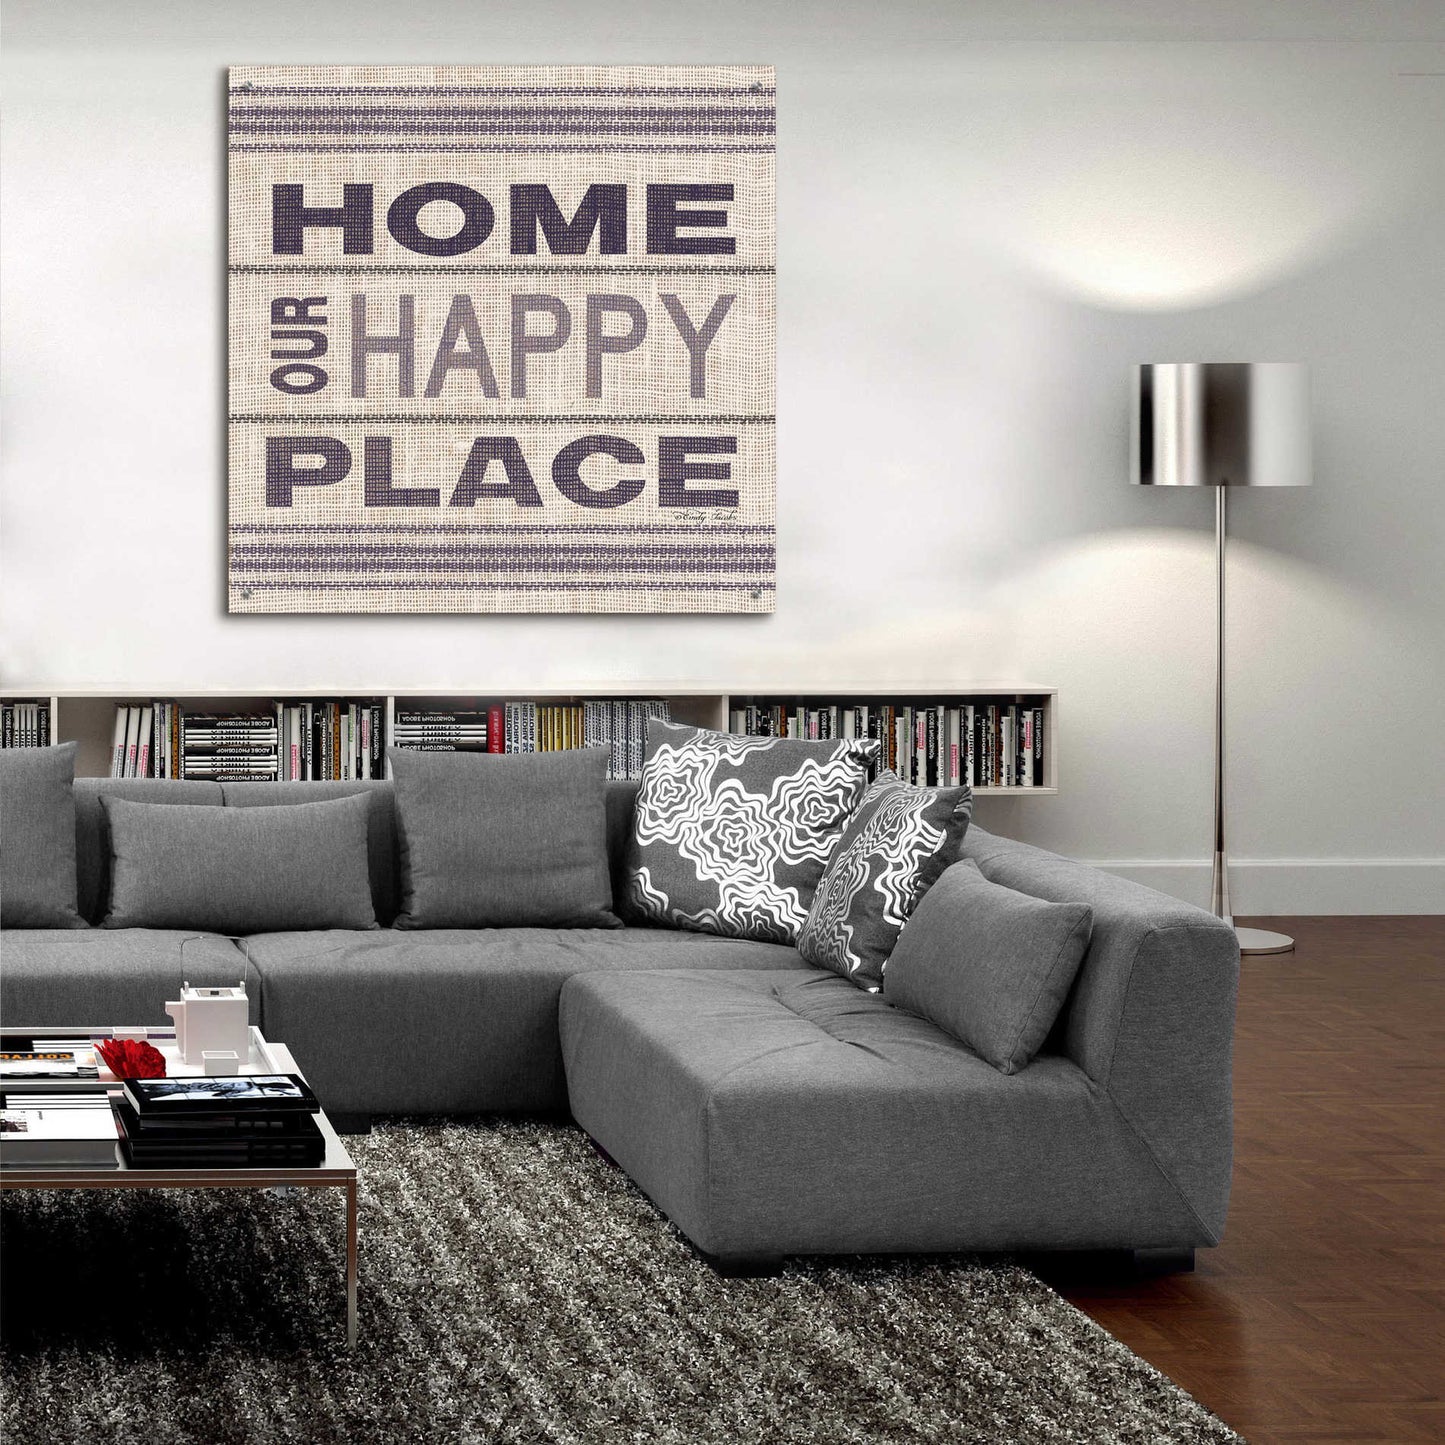 Epic Art 'Home - Our Happy Place' by Cindy Jacobs, Acrylic Glass Wall Art,36x36